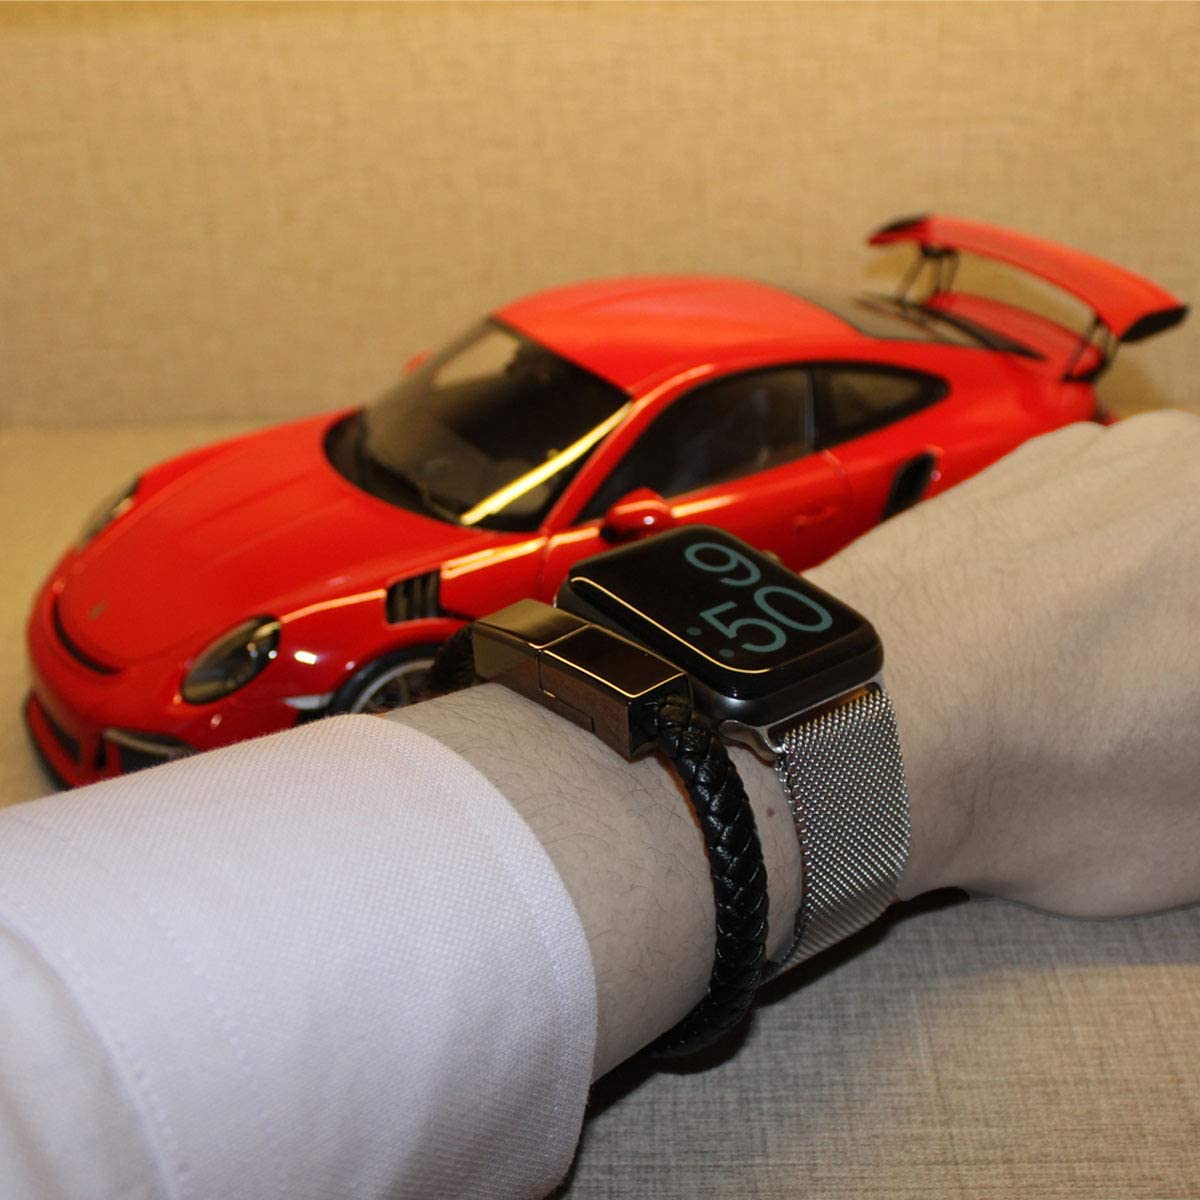 A person is wearing a black leather USB charging bracelet on his wrist along with a black watch. There is a red model car in the background.